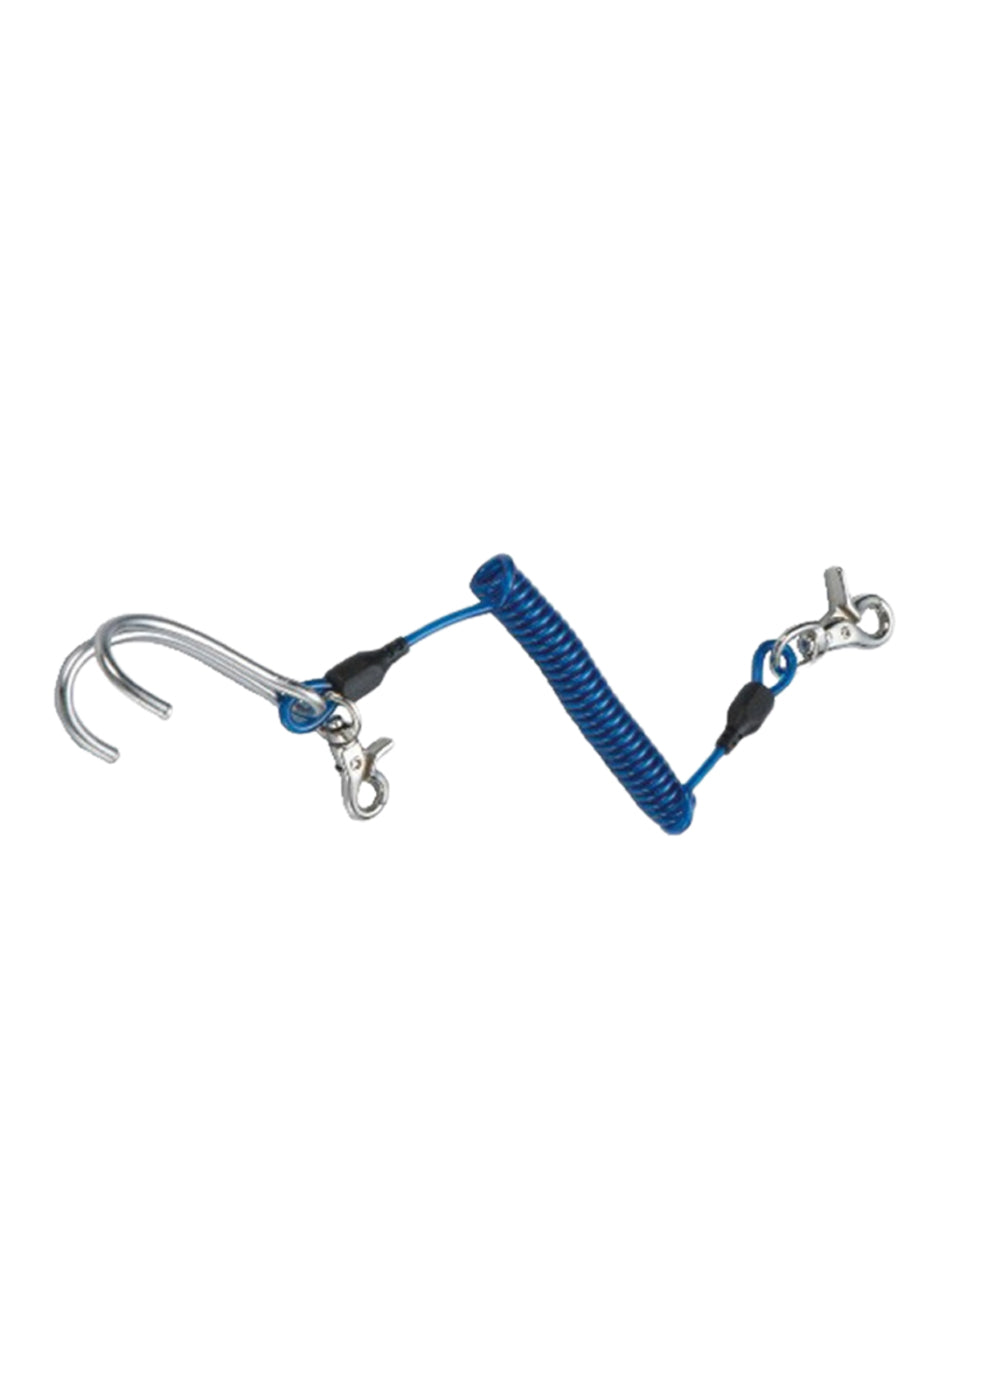 Problue Reef Hook Blue - Heavy Duty Wire Shock Line with Stainless Hook and Snap Clips.